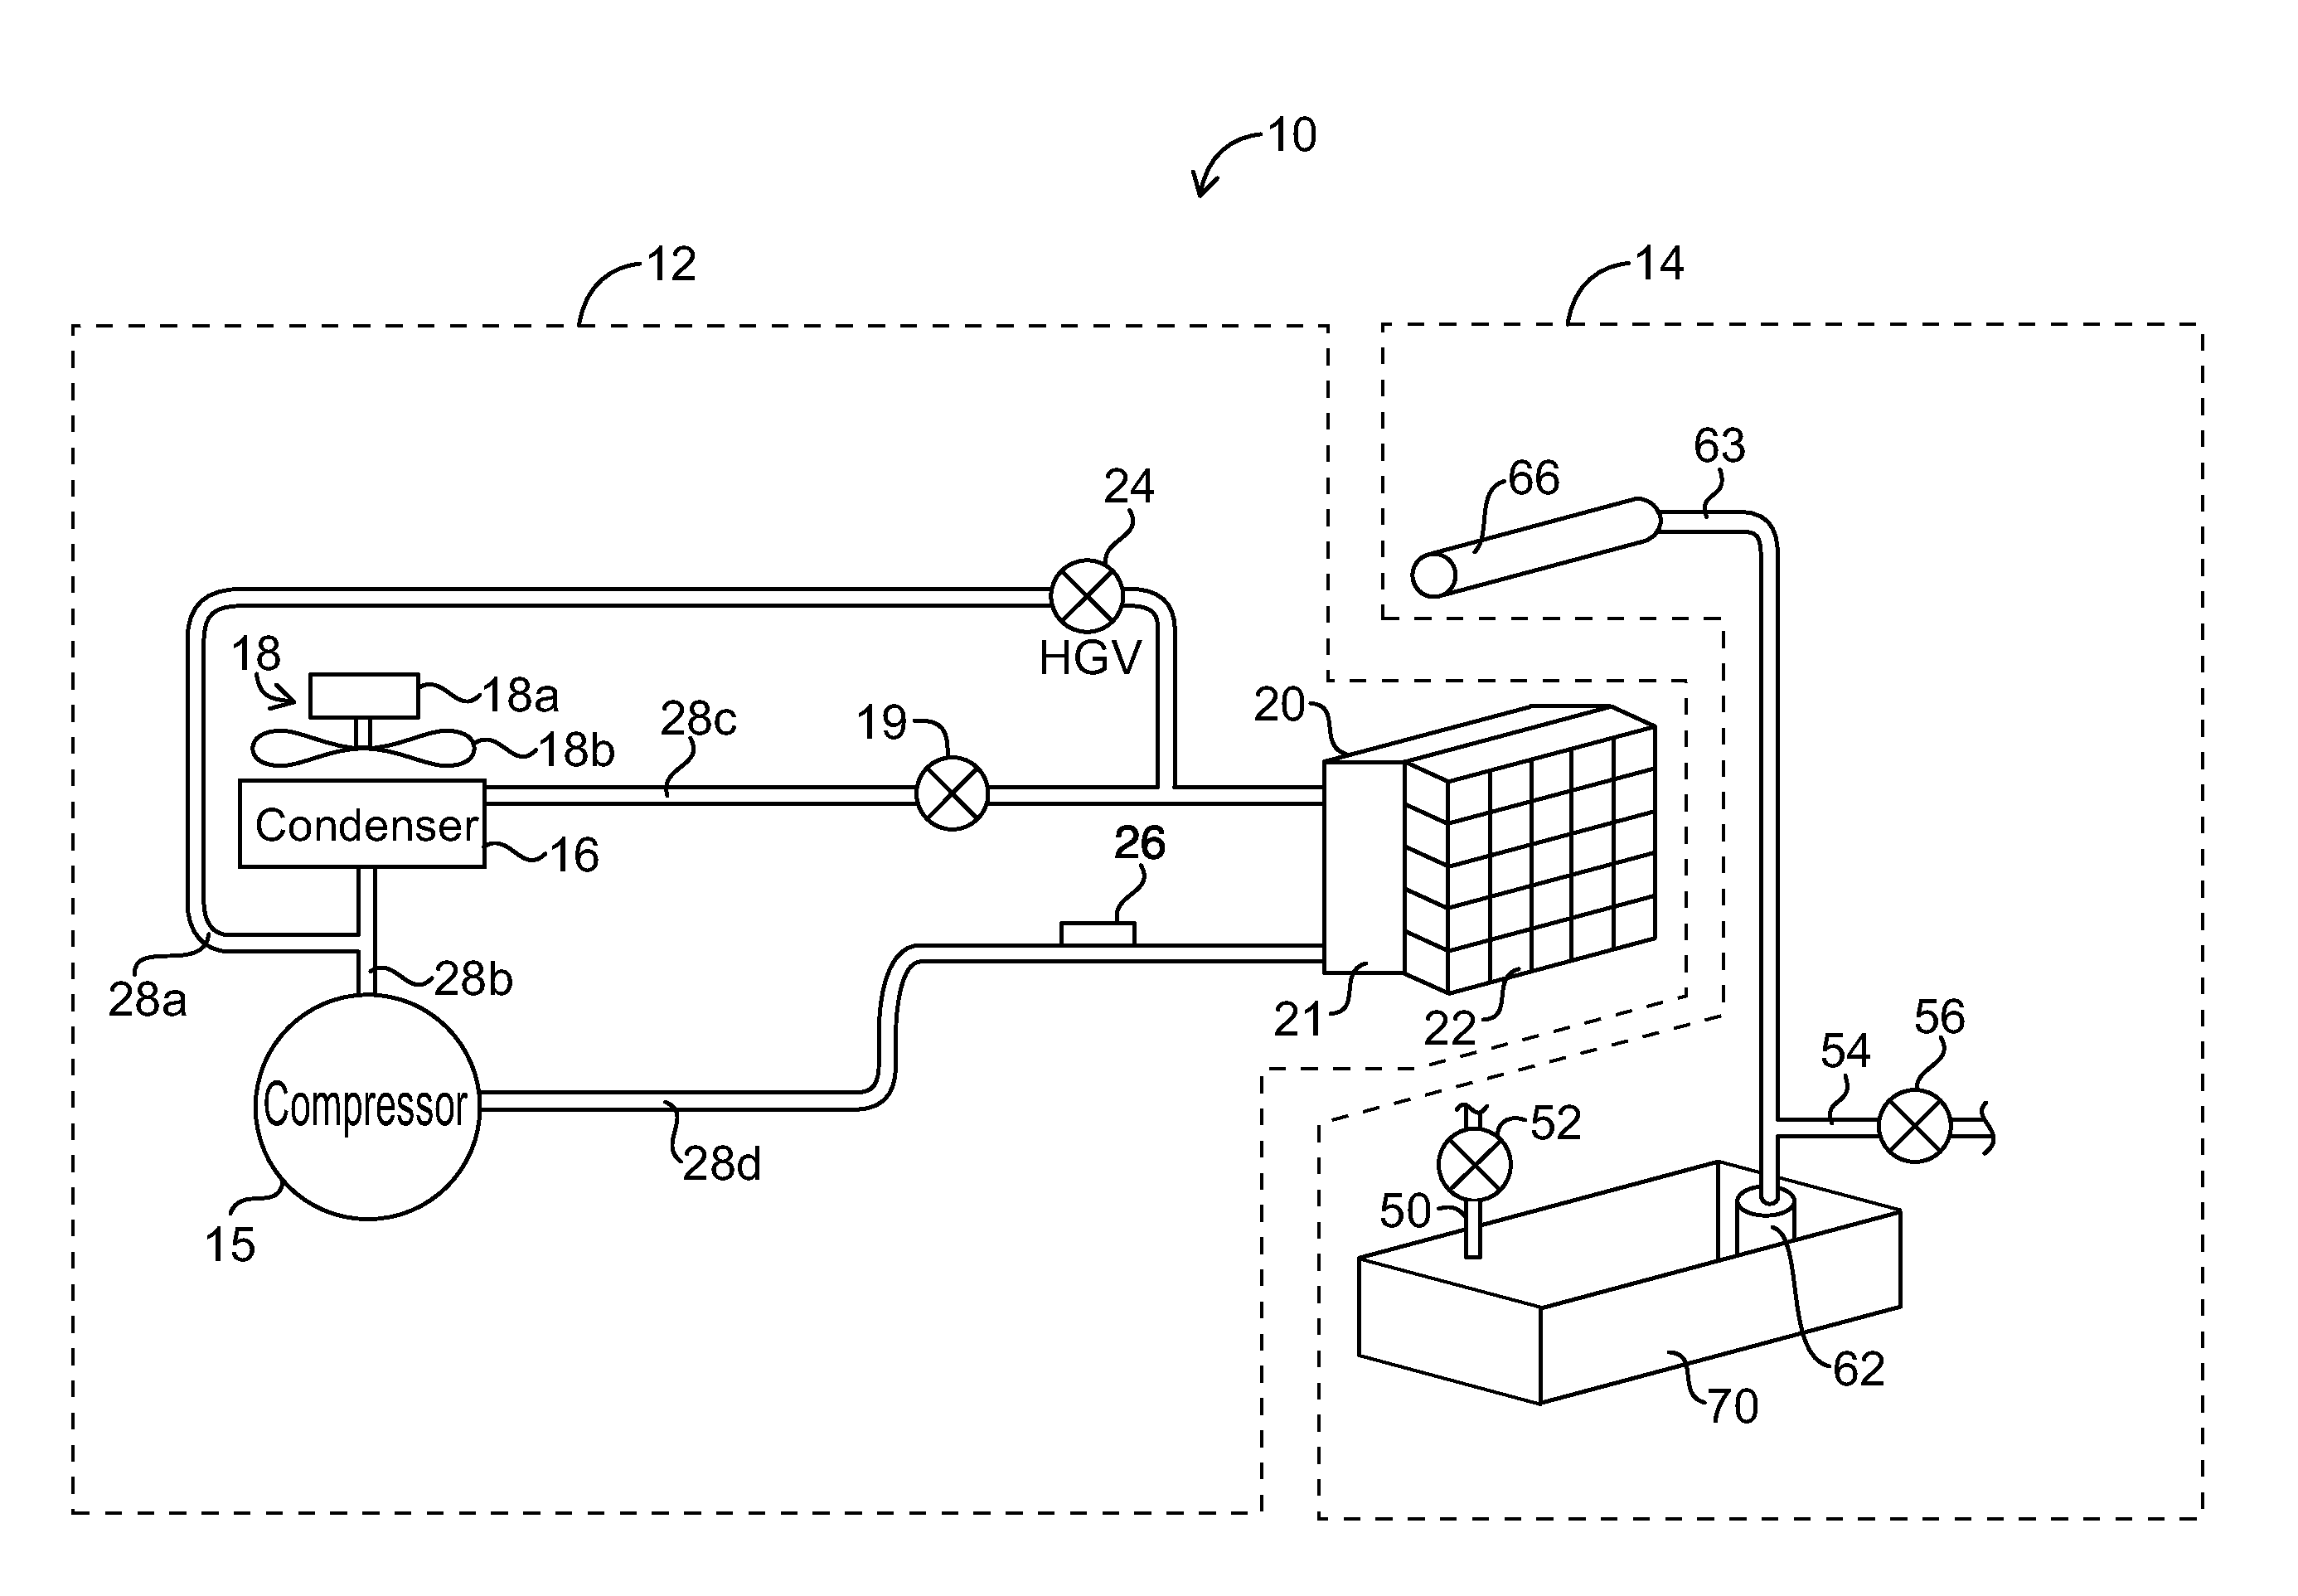 Ice maker with reversing condenser fan motor to maintain clean condenser